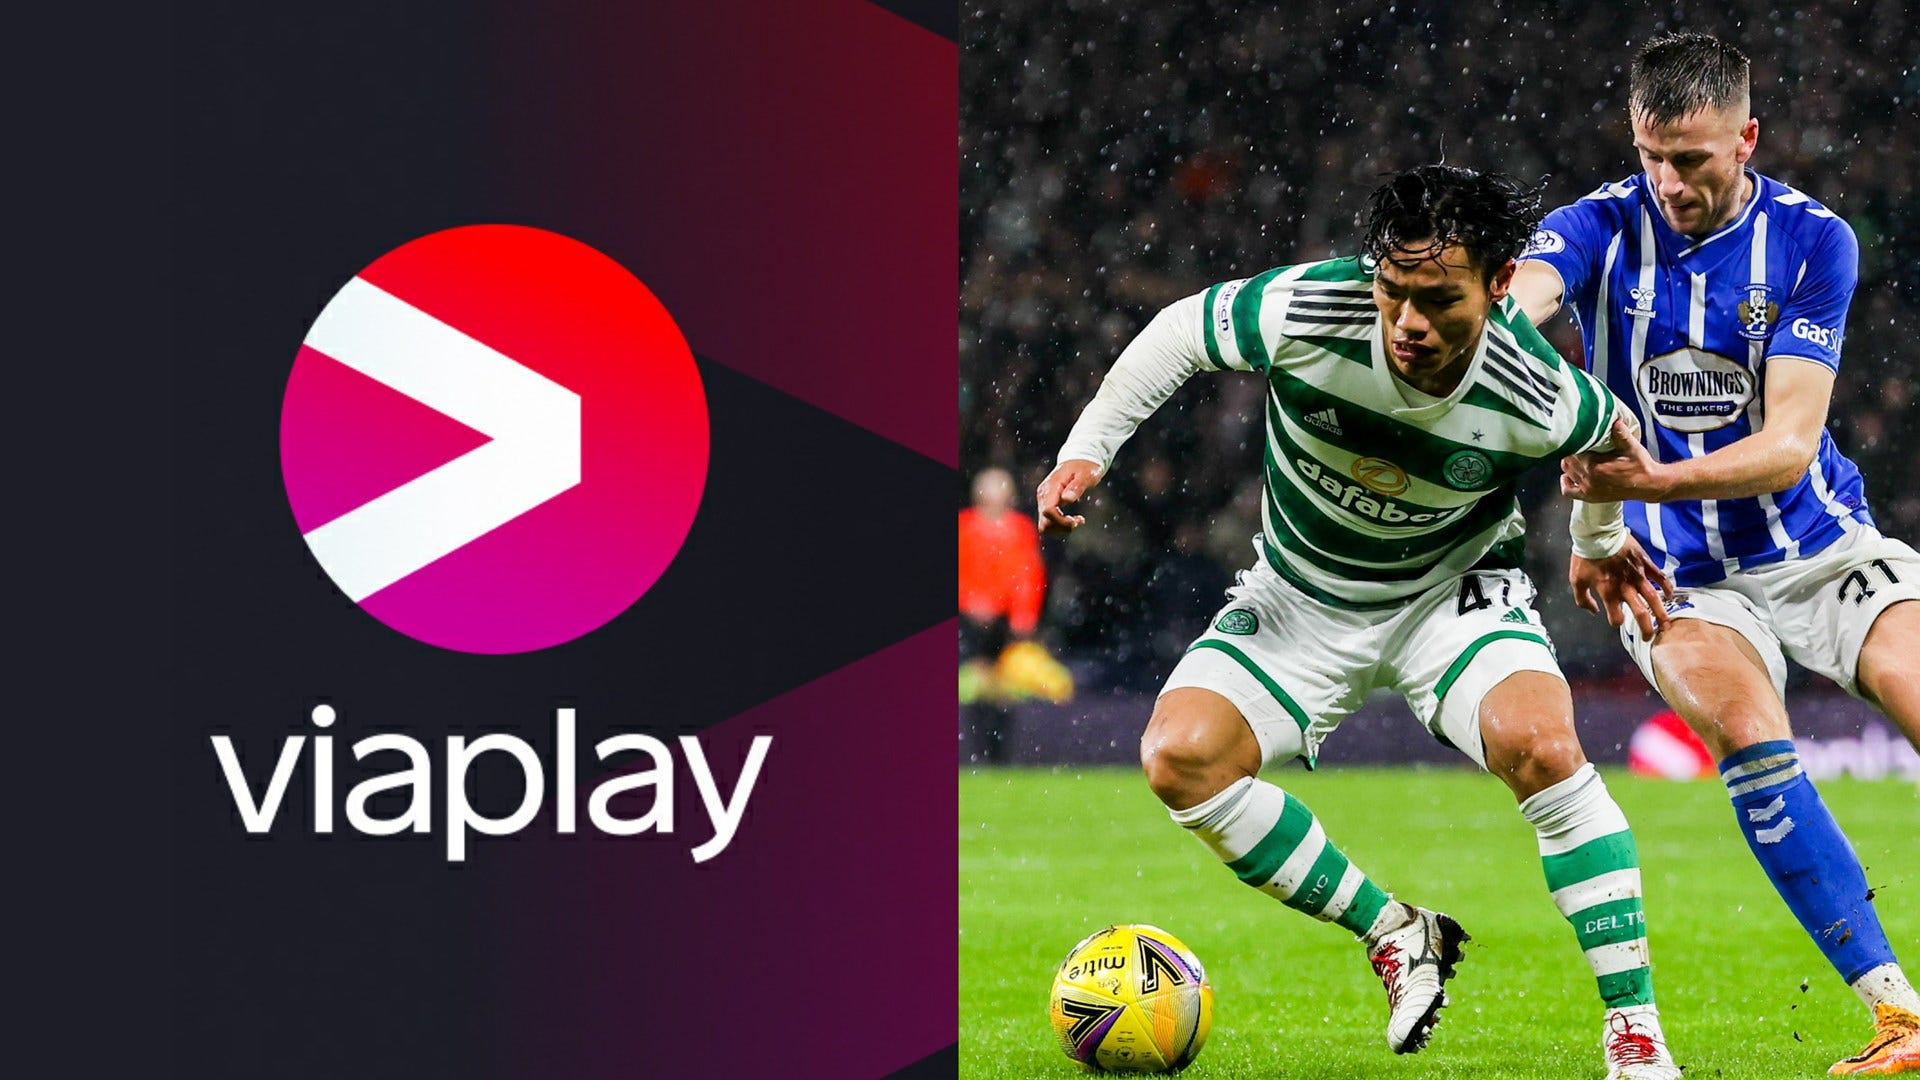 Stream live football on Viaplay App, prices, subscription packages, platforms and full list of competitions to watch Goal US